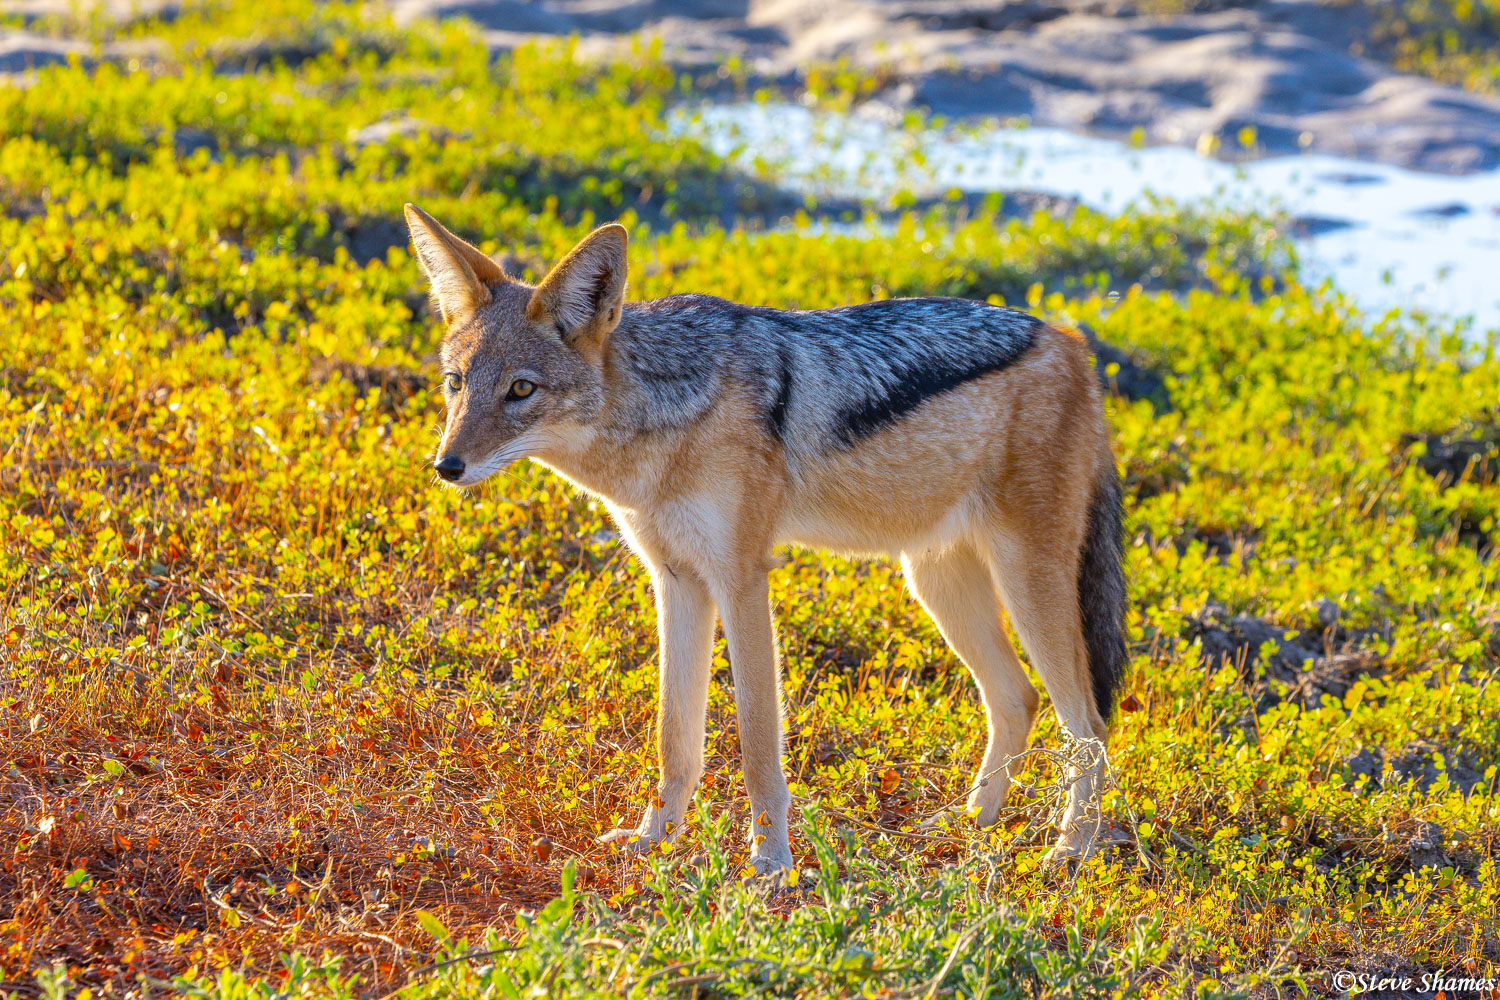 These are called Black Backed Jackals. You can see why. This one is enjoying the warm morning sun.